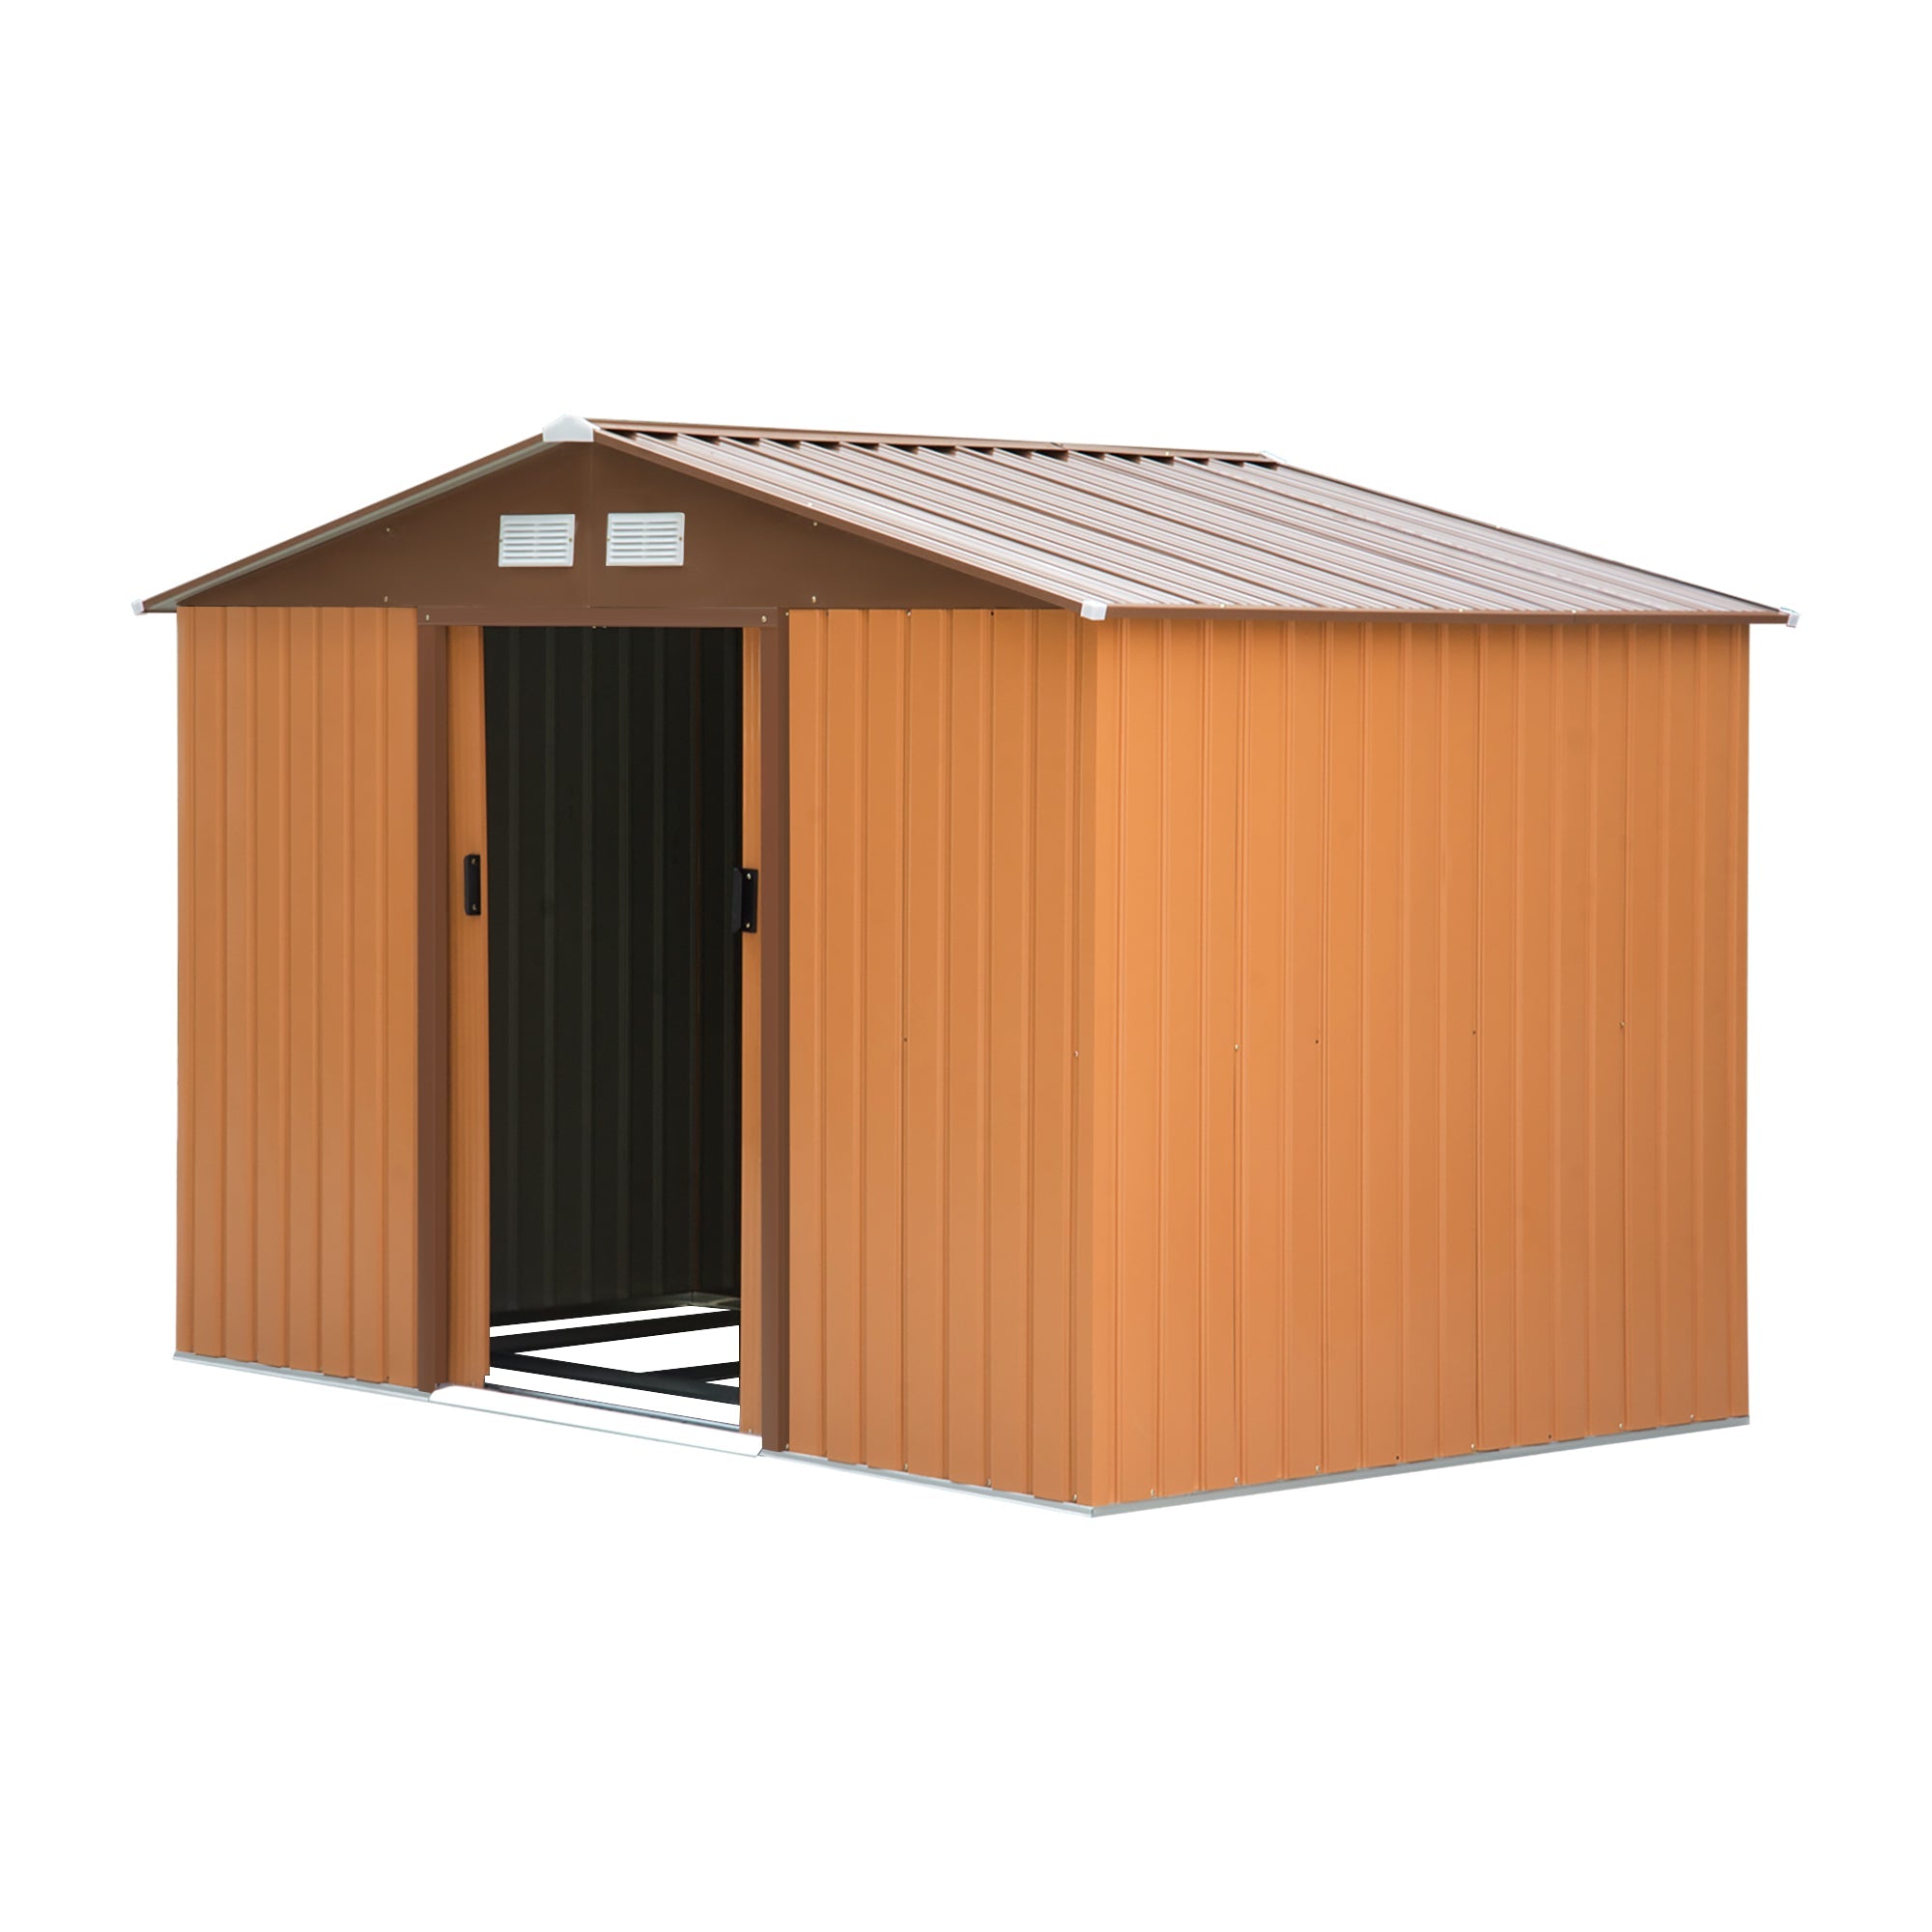 9 x 6FT Garden Metal Storage Shed Outdoor Storage Shed with Foundation Ventilation & Doors, Yellow-1